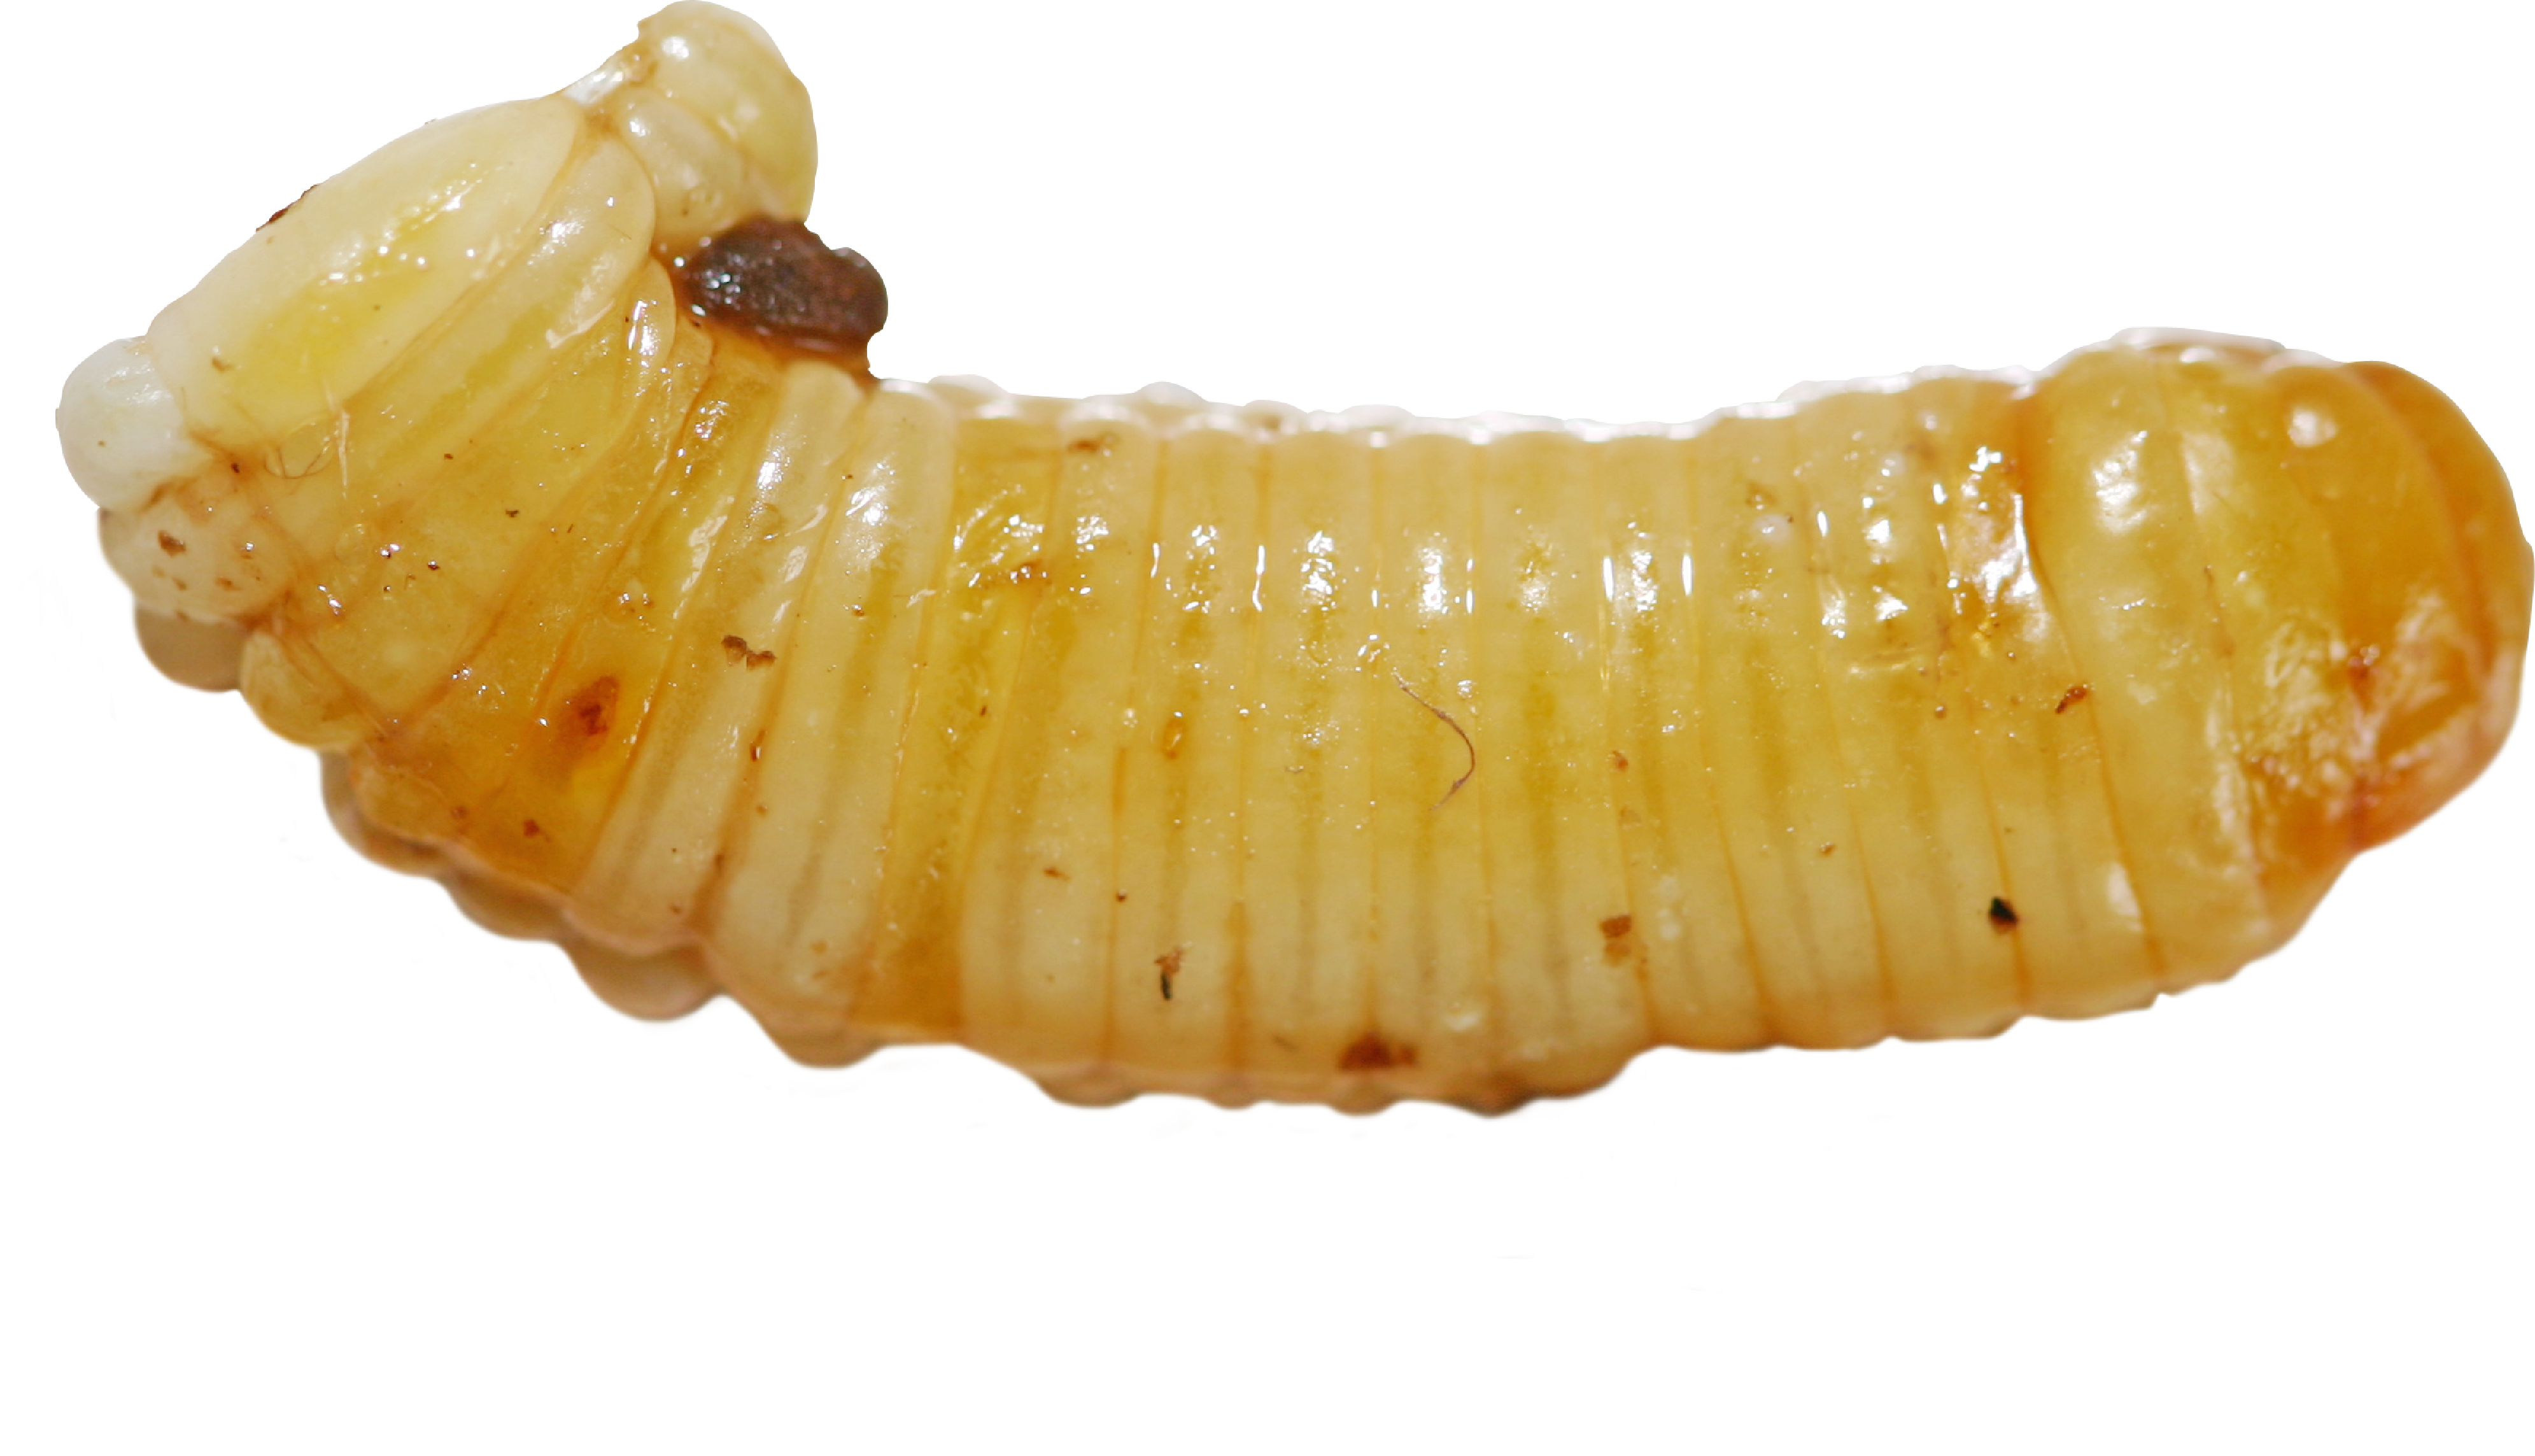 Maggots png images free. Worm clipart larva